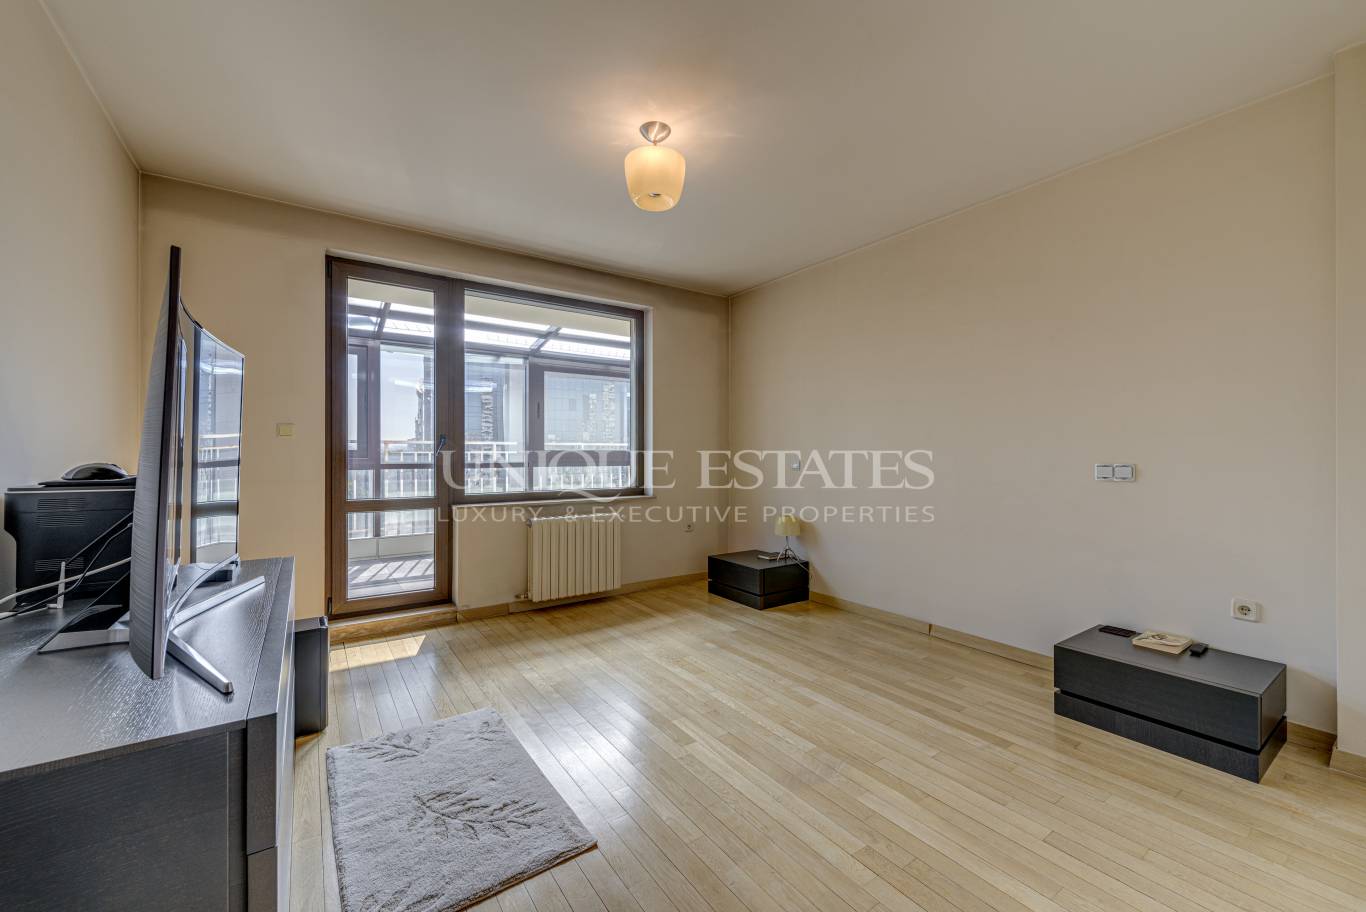 Apartment for sale in Sofia, Borovo with listing ID: K16114 - image 6